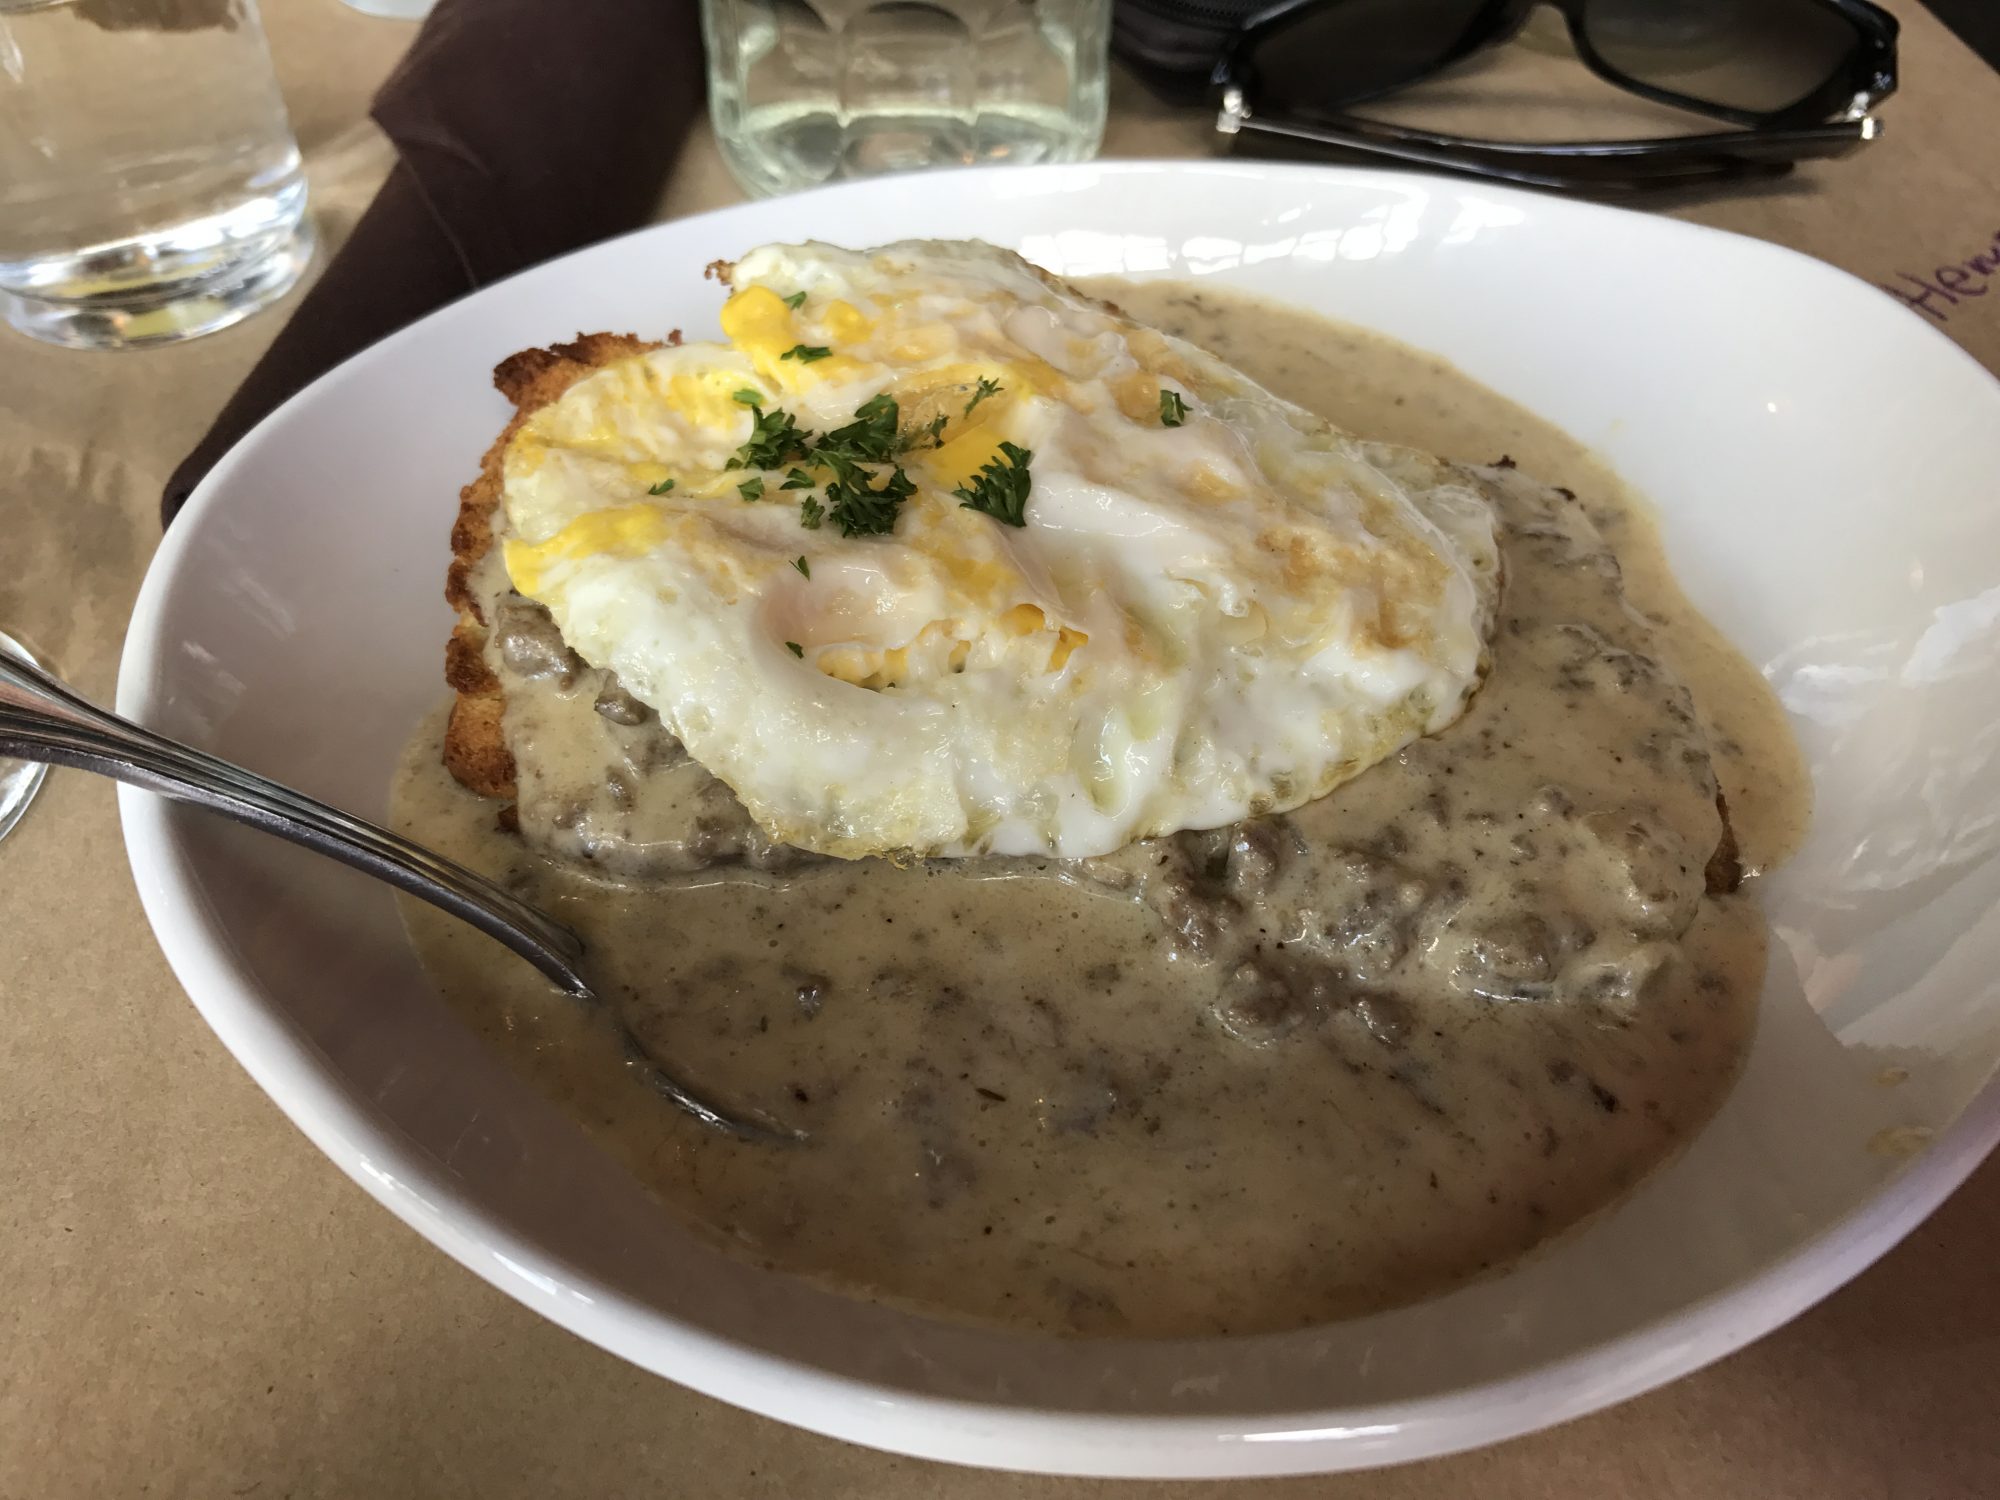 biscuits with an overhard egg and elk gravy